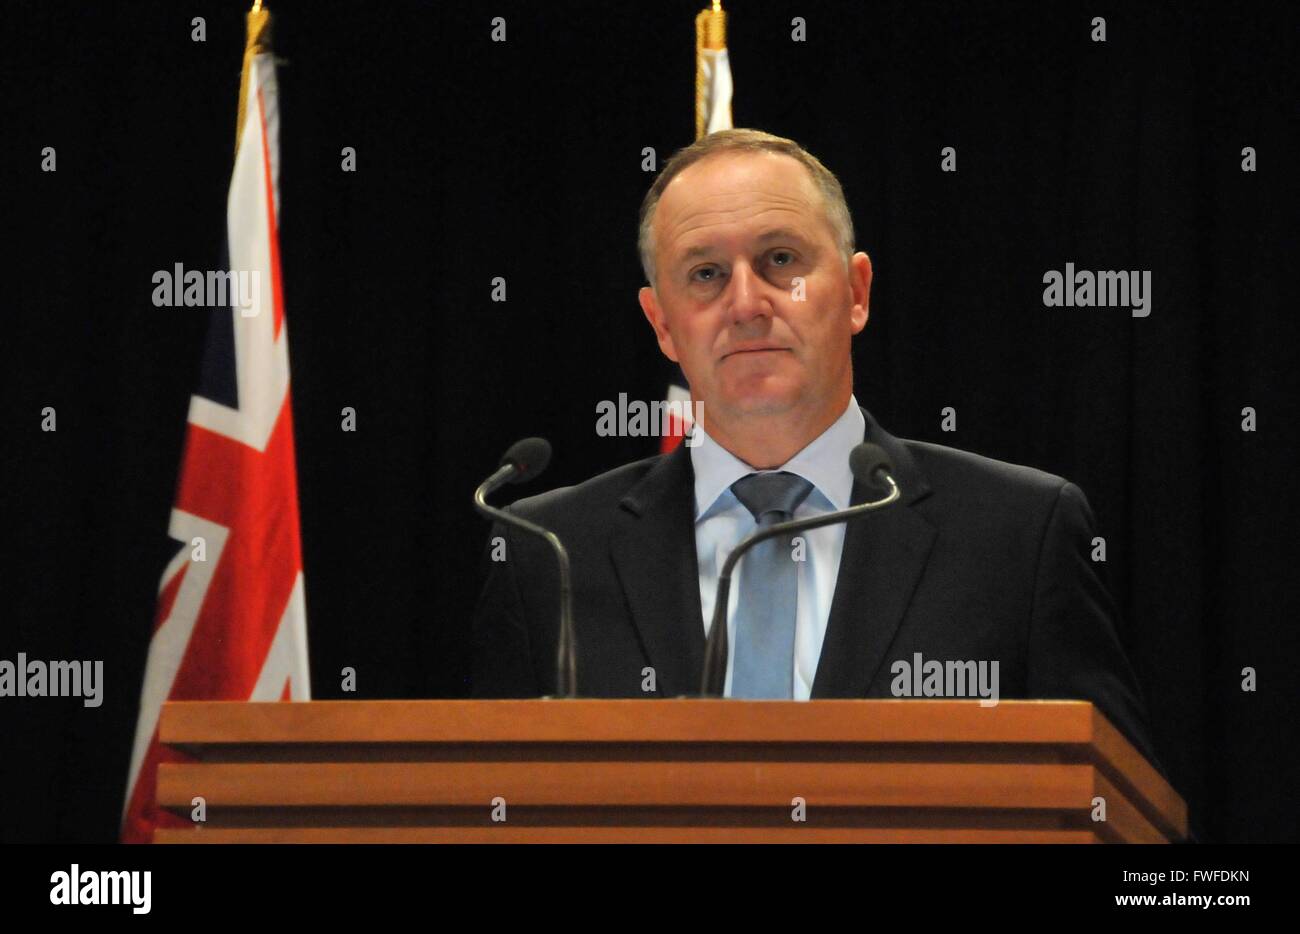 Wellington, New Zealand. 5th Apr, 2016. New Zealand's Prime Minister John Key addresses a press conference in Wellington, capital of New Zealand, April 5, 2016. The New Zealand government is nominating former Prime Minister Helen Clark for the position of the United Nations secretary-general, John Key said on Tuesday. Credit:  Su Liang/Xinhua/Alamy Live News Stock Photo